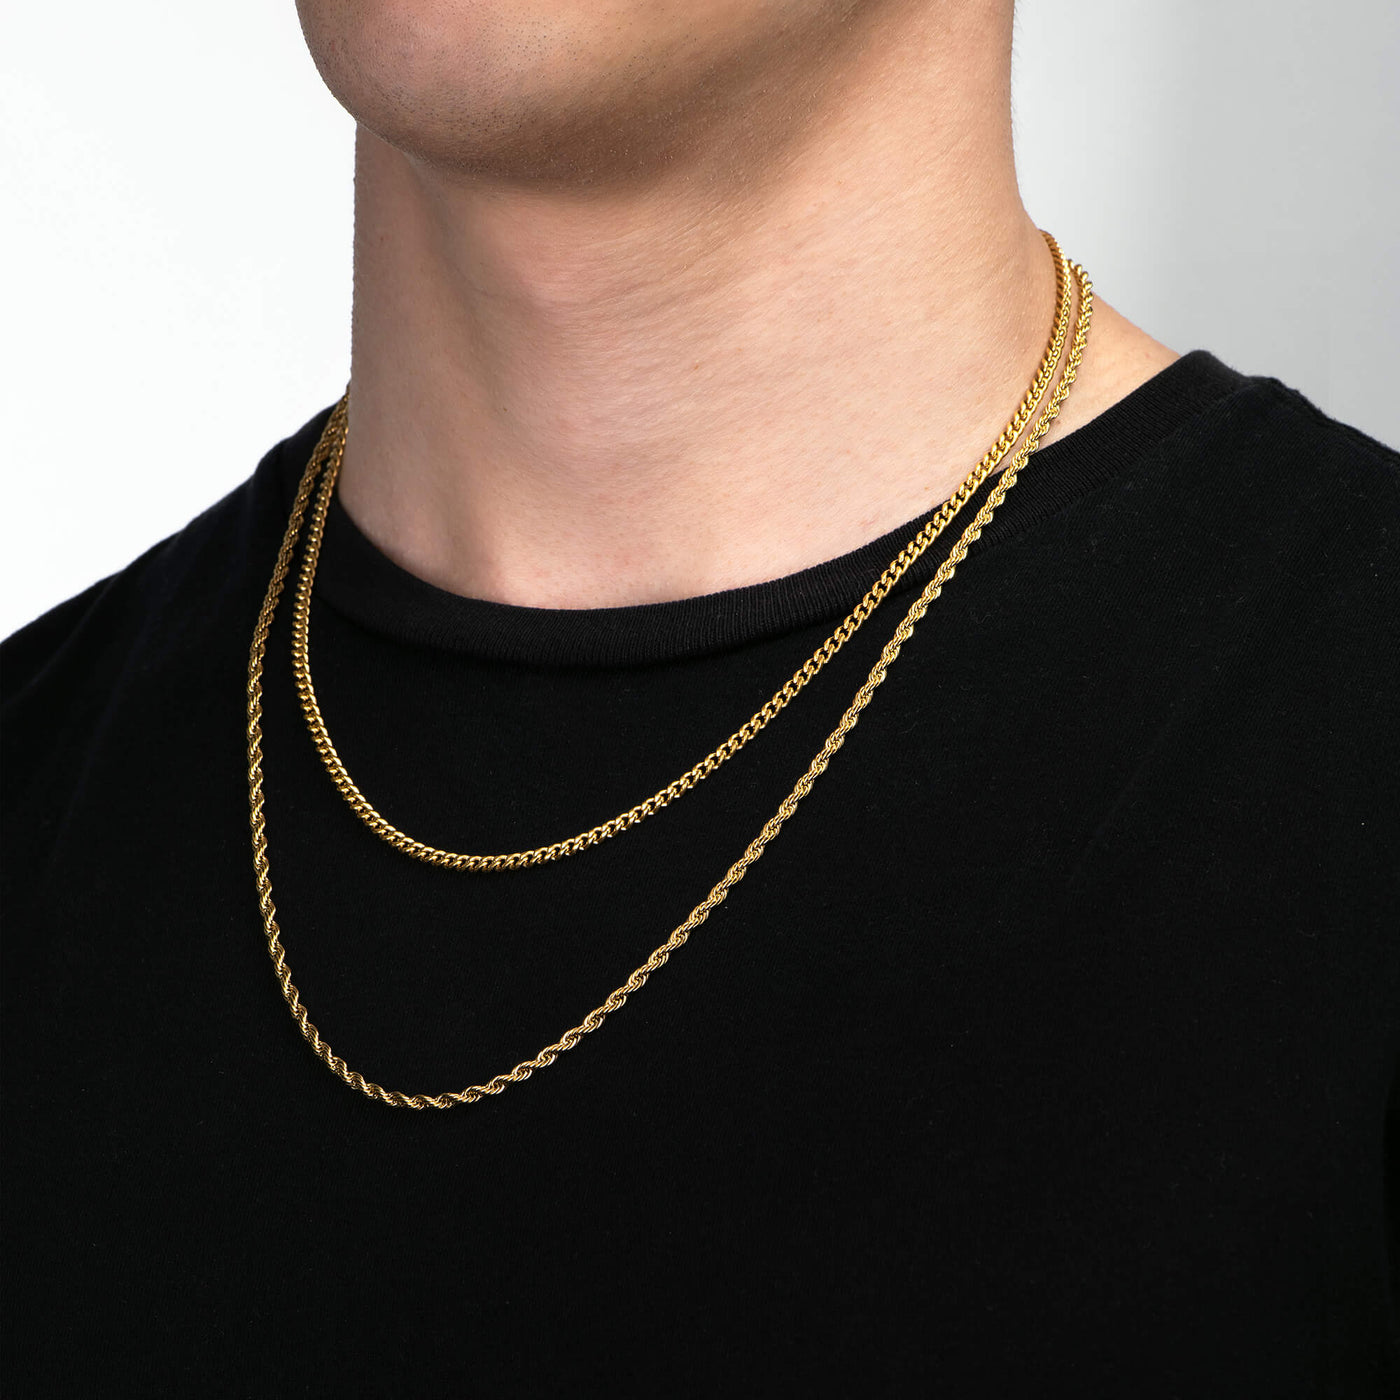 Lifetime Jewelry Cuban Link Chain Necklace